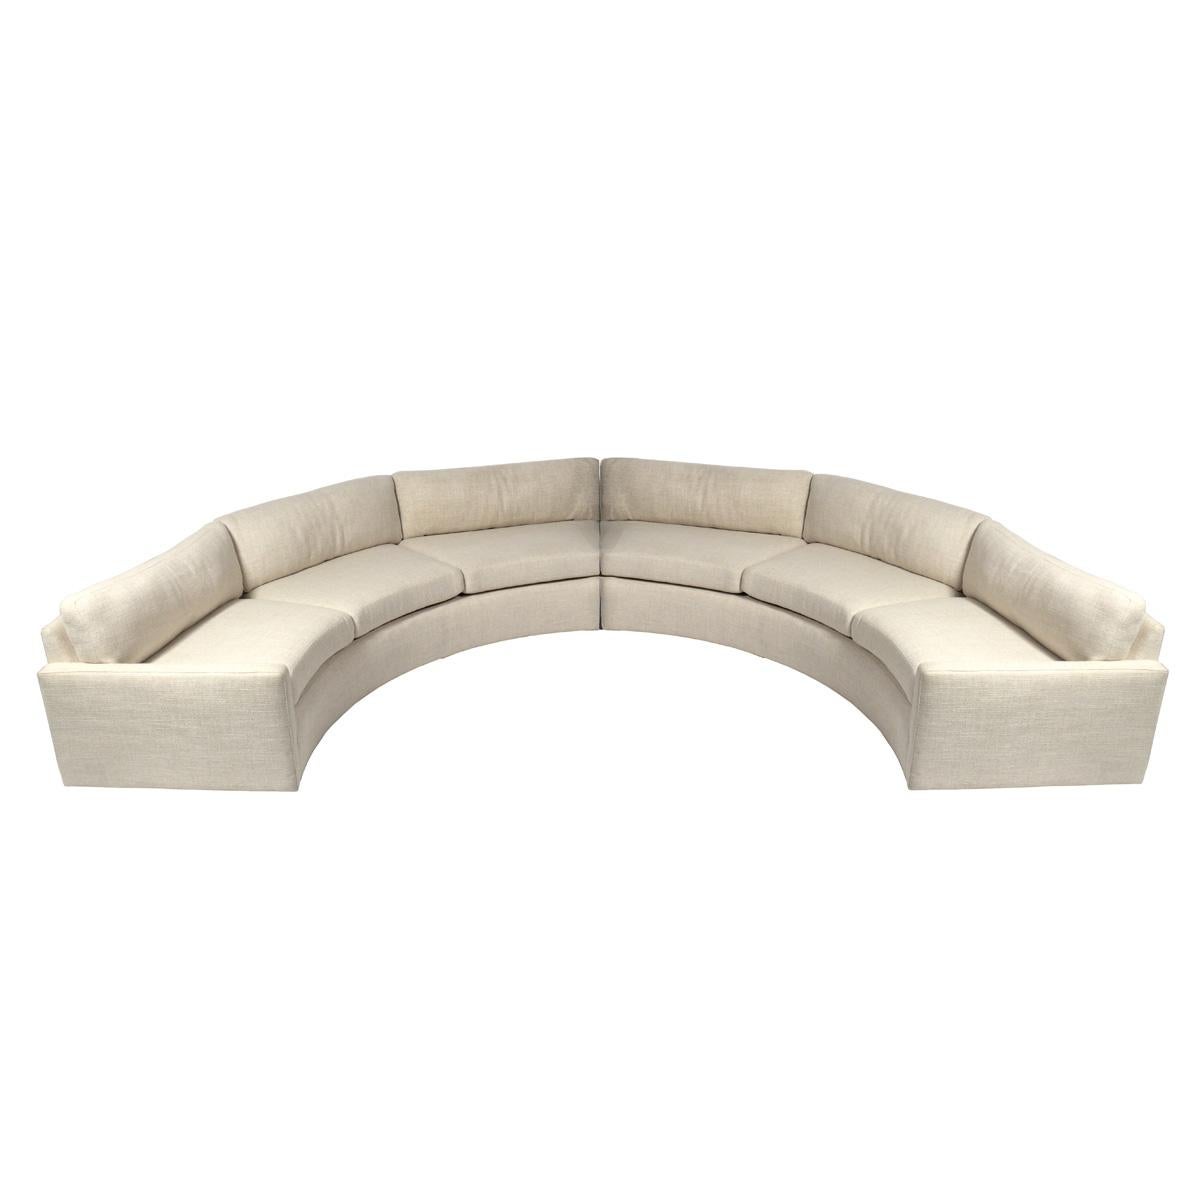 Milo Baughman Curved Sofa in Pierre Frey Fabric For Sale